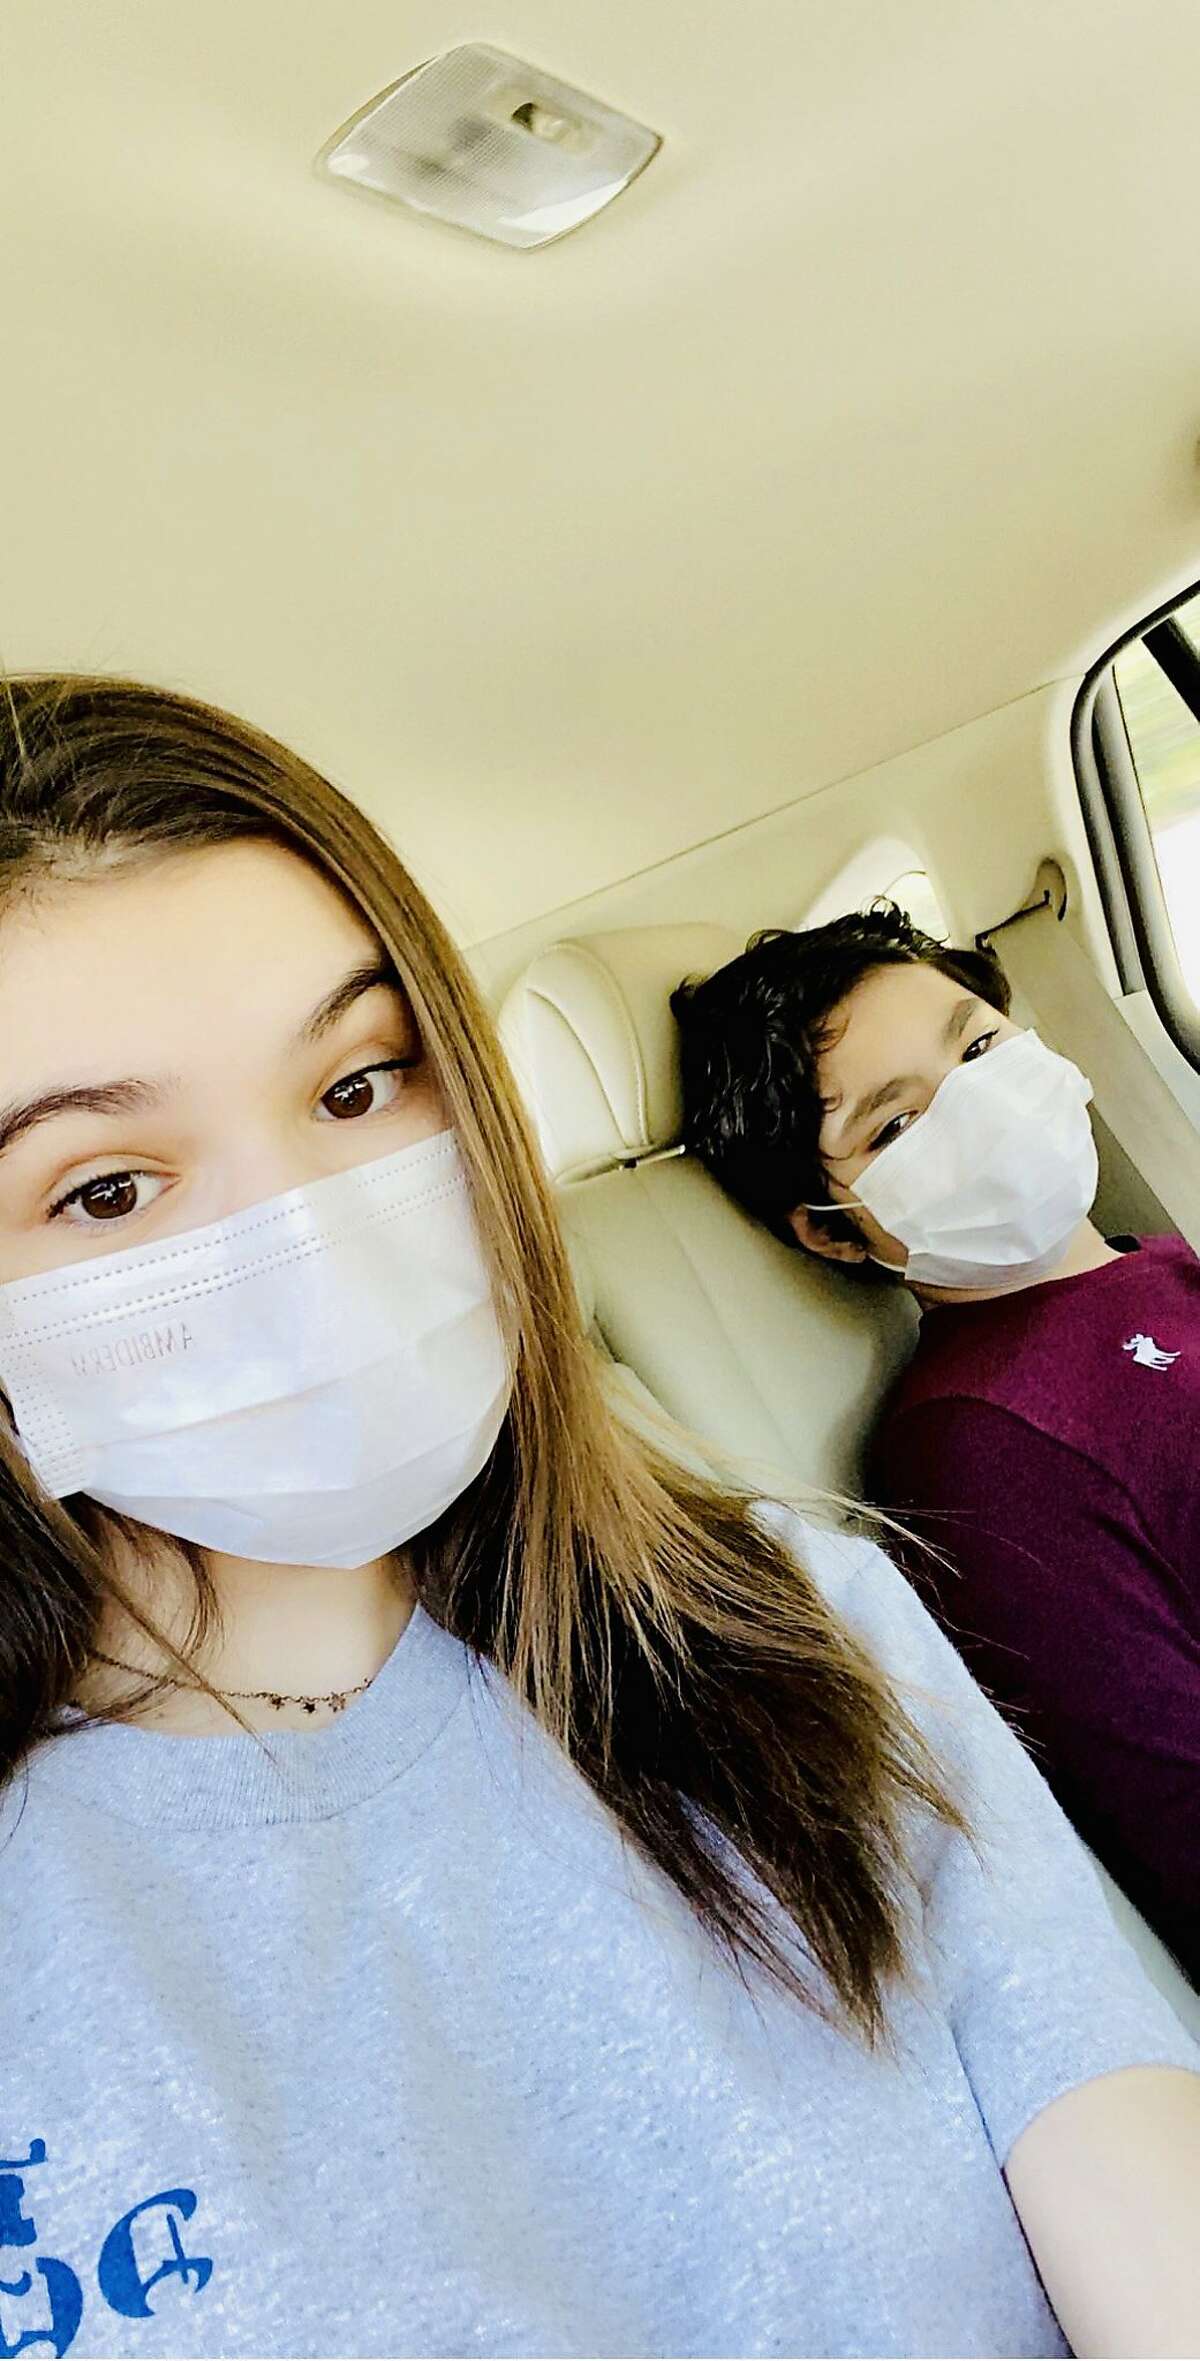 Natalia and Santiago Ruspini on the way to get tested for COVID-19 on April 30, a month after positive results for themselves, their parents, and their family. Their nanny and father were hospitalized but recovered. Natalia tested negative a day later, on May 1, Santiago on May 8.